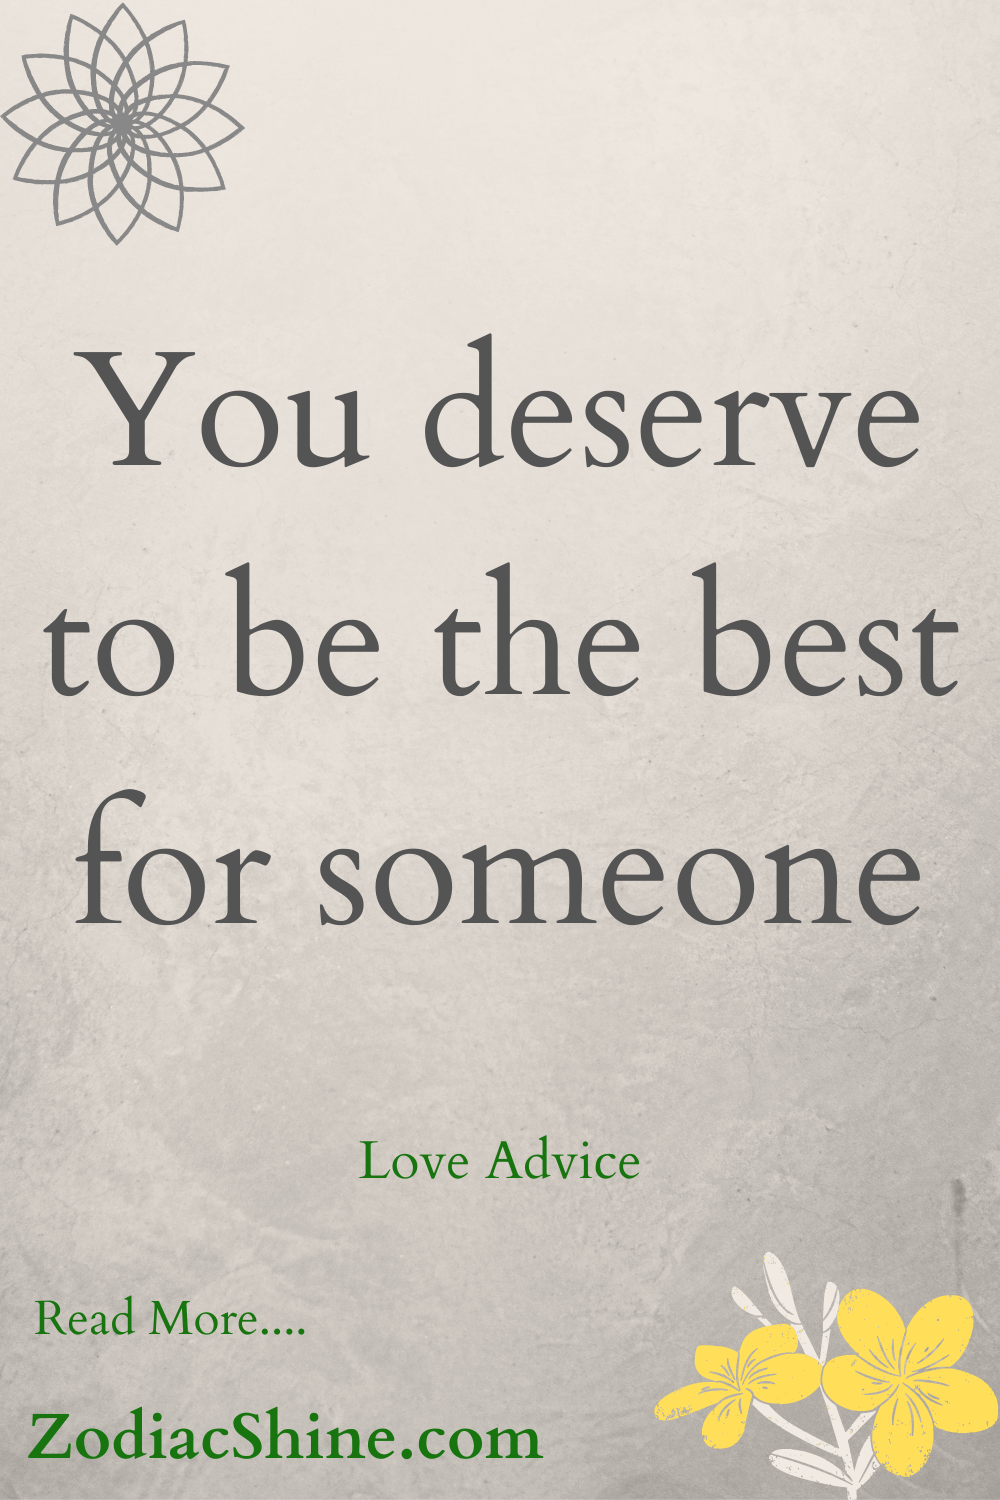 You deserve to be the best for someone